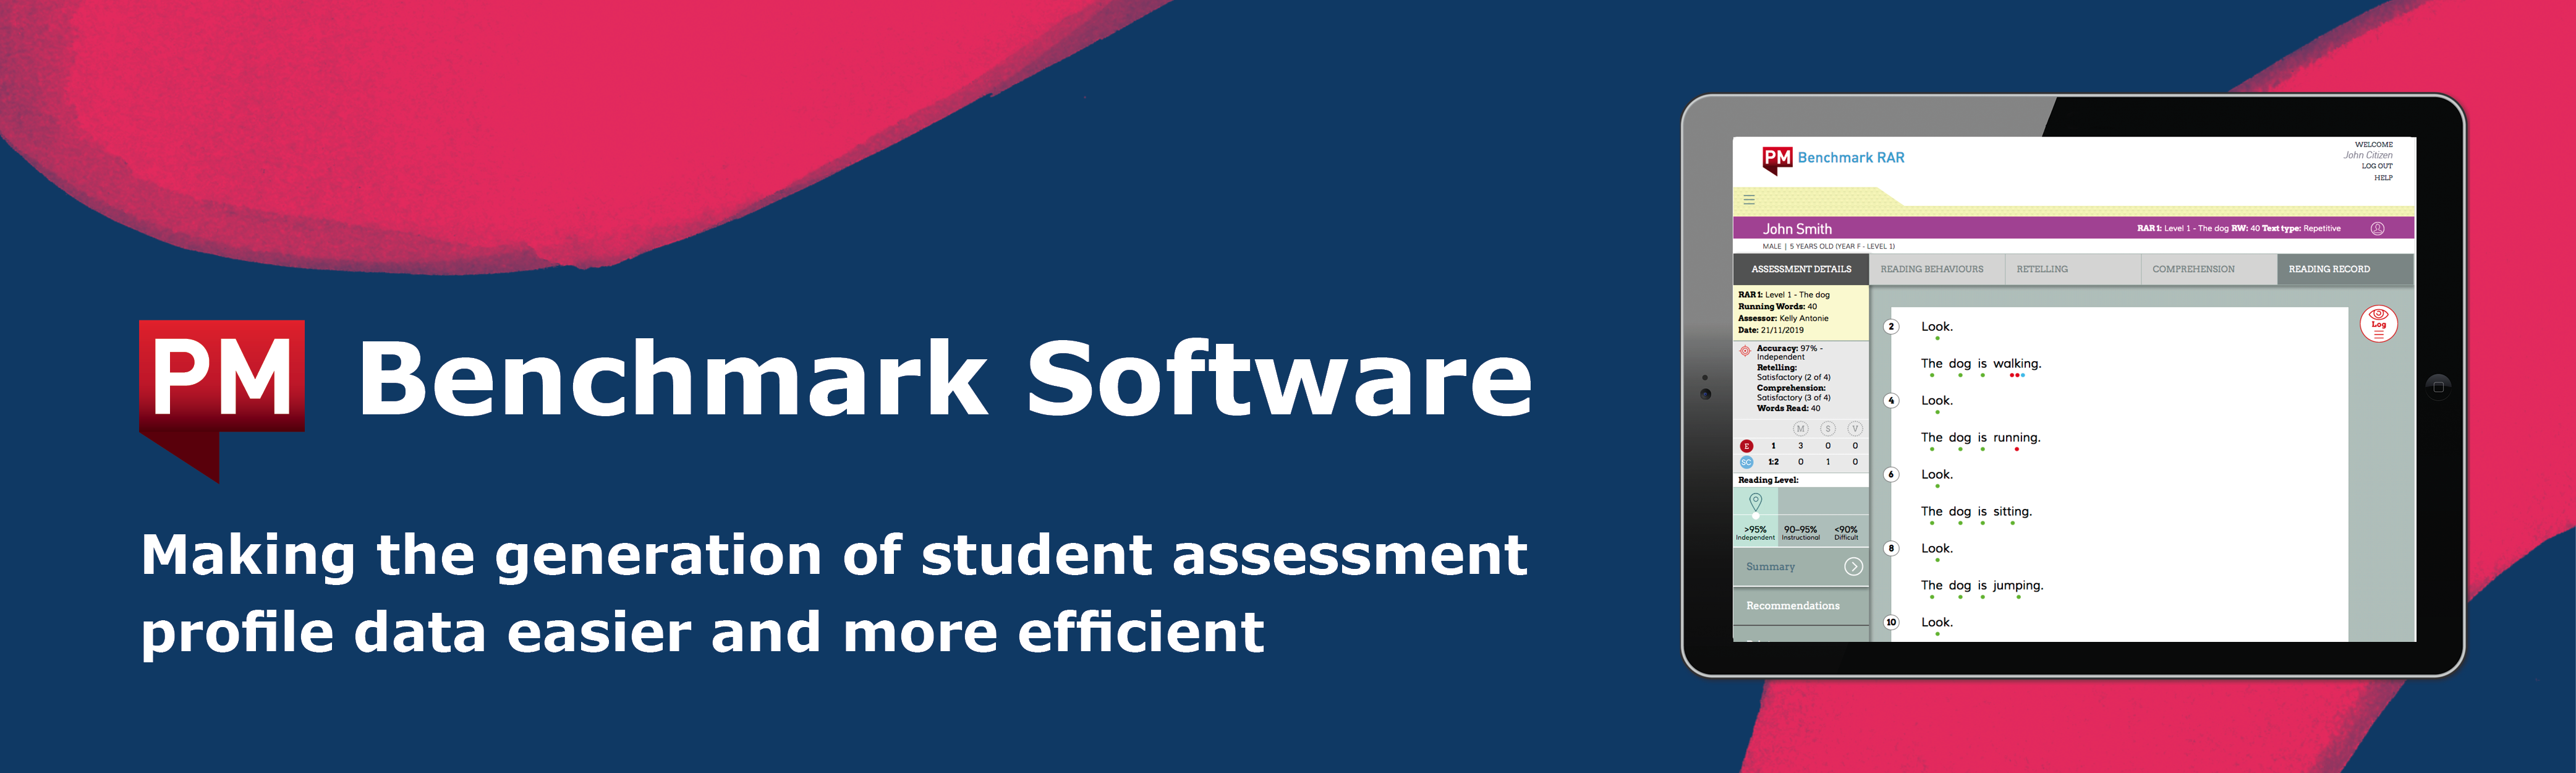 PM Benchmark Software